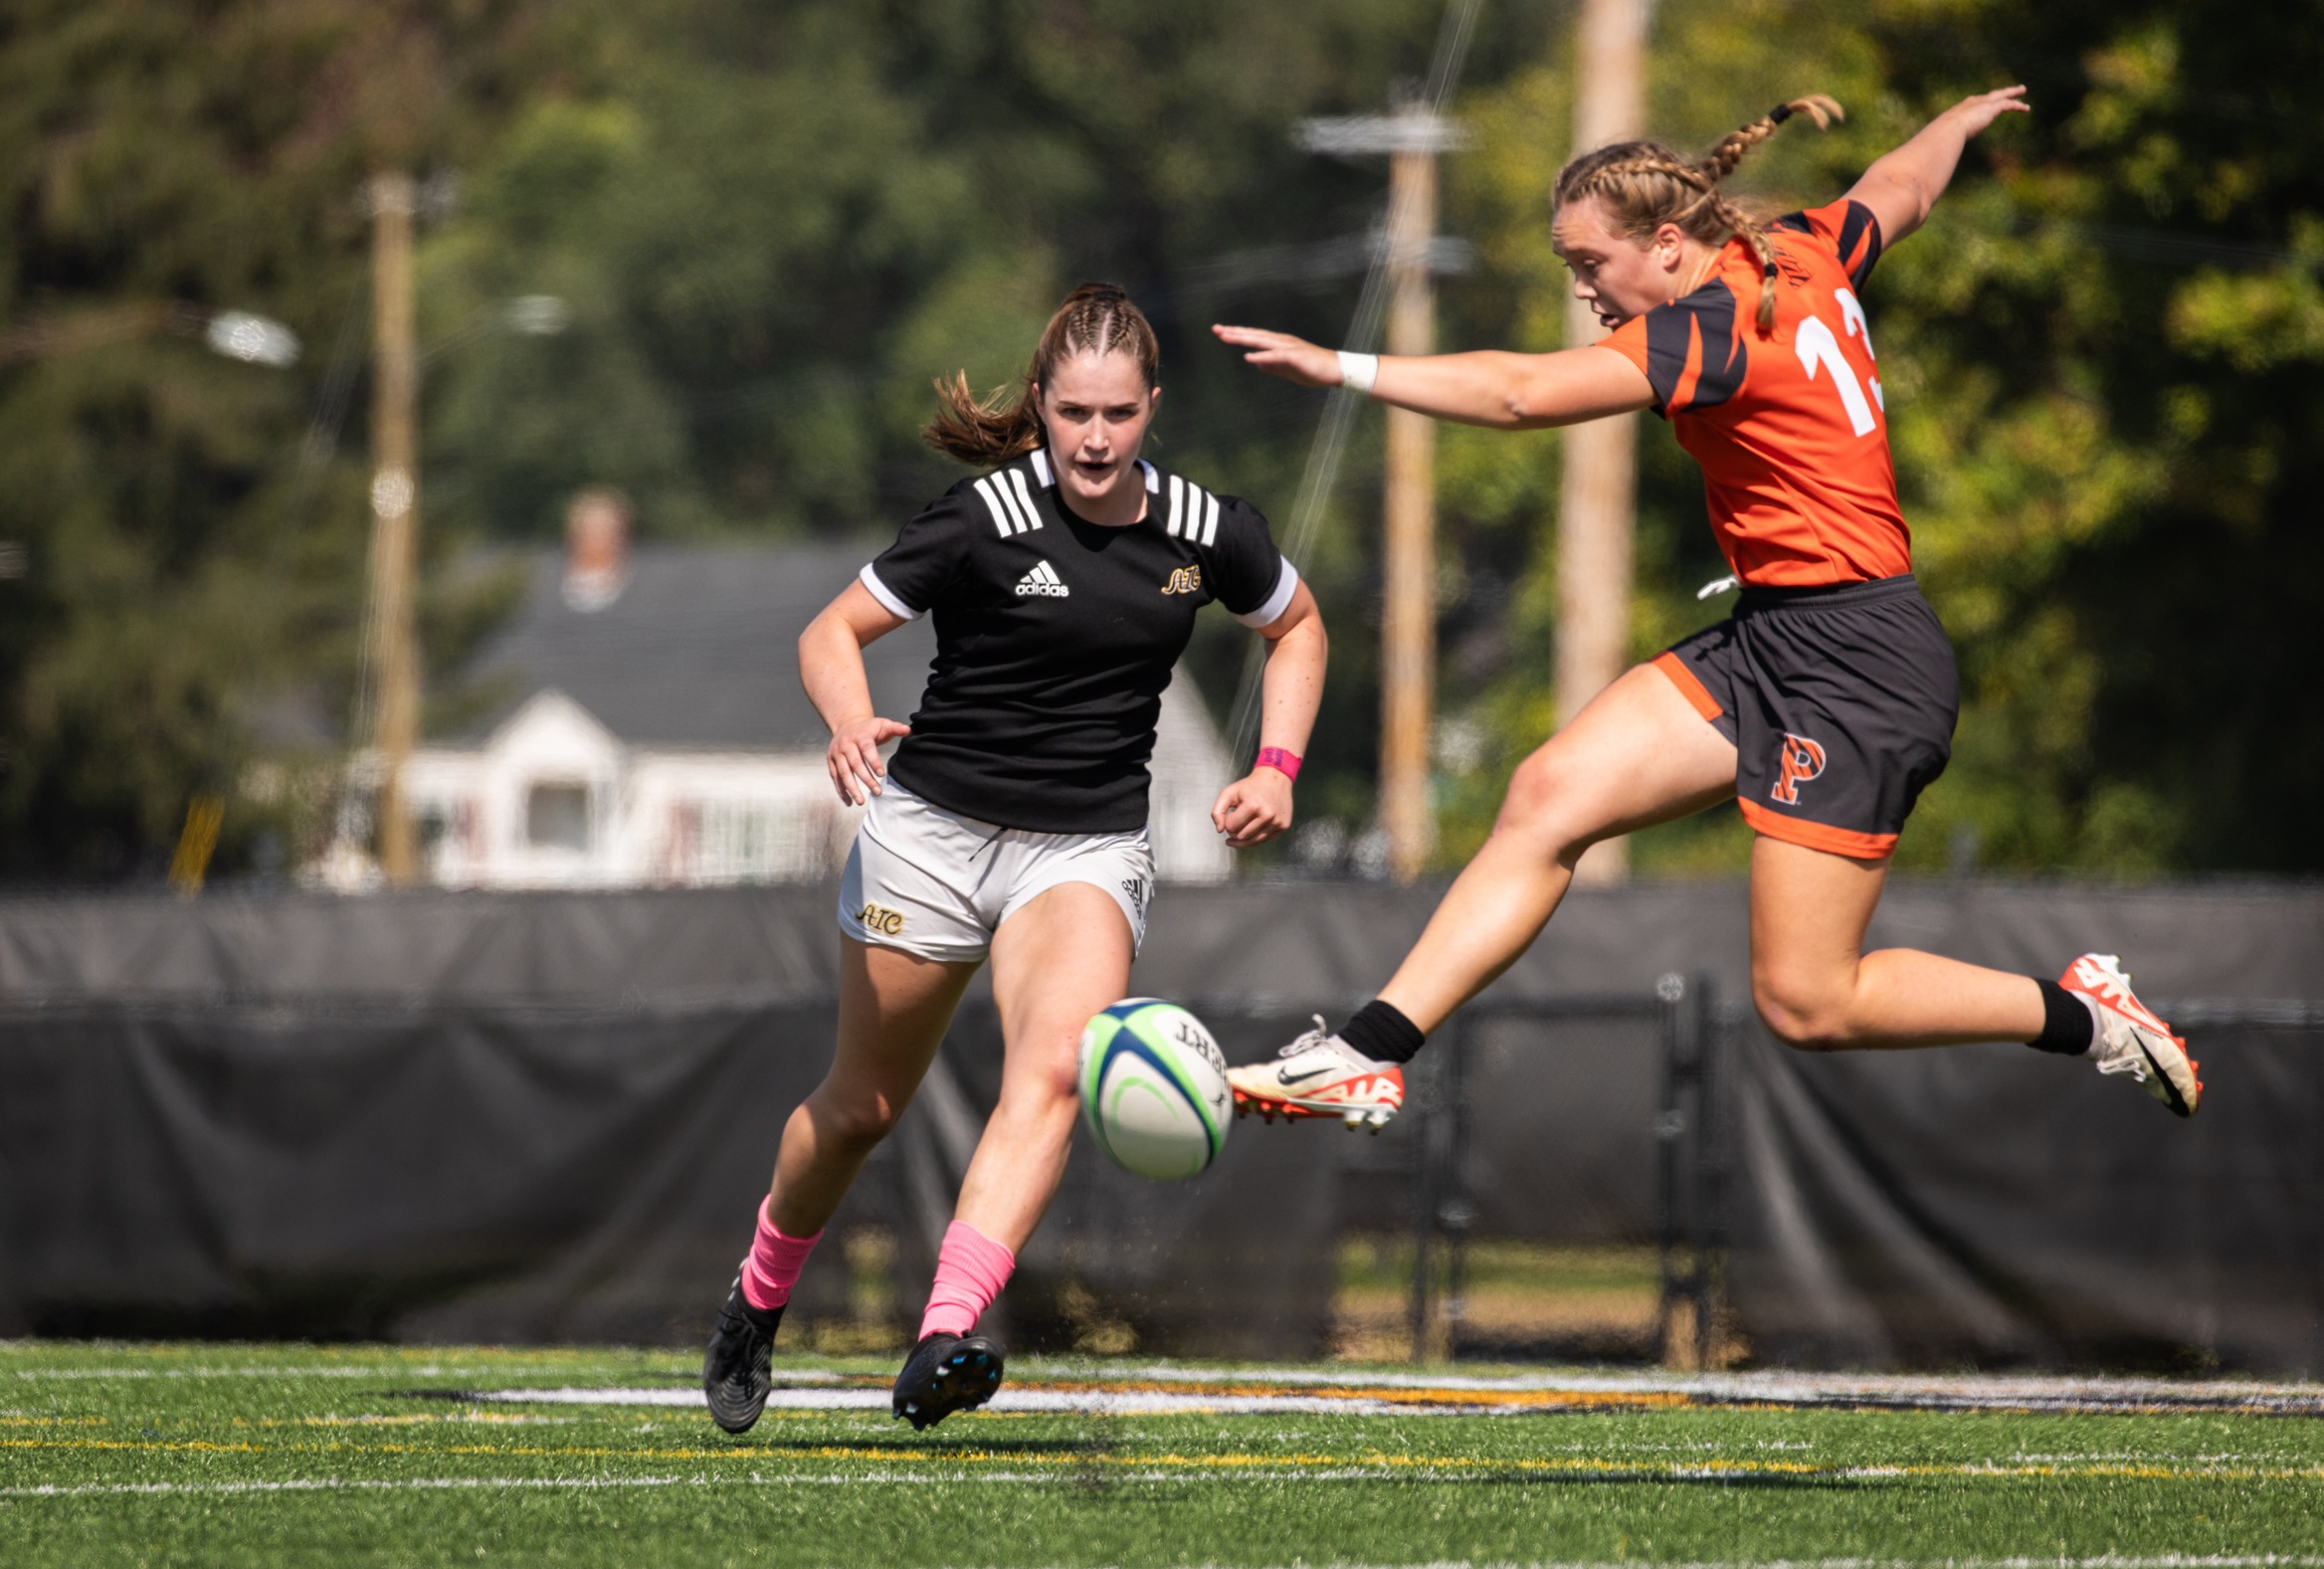 Women's Rugby blanks West Chester for key NIRA win